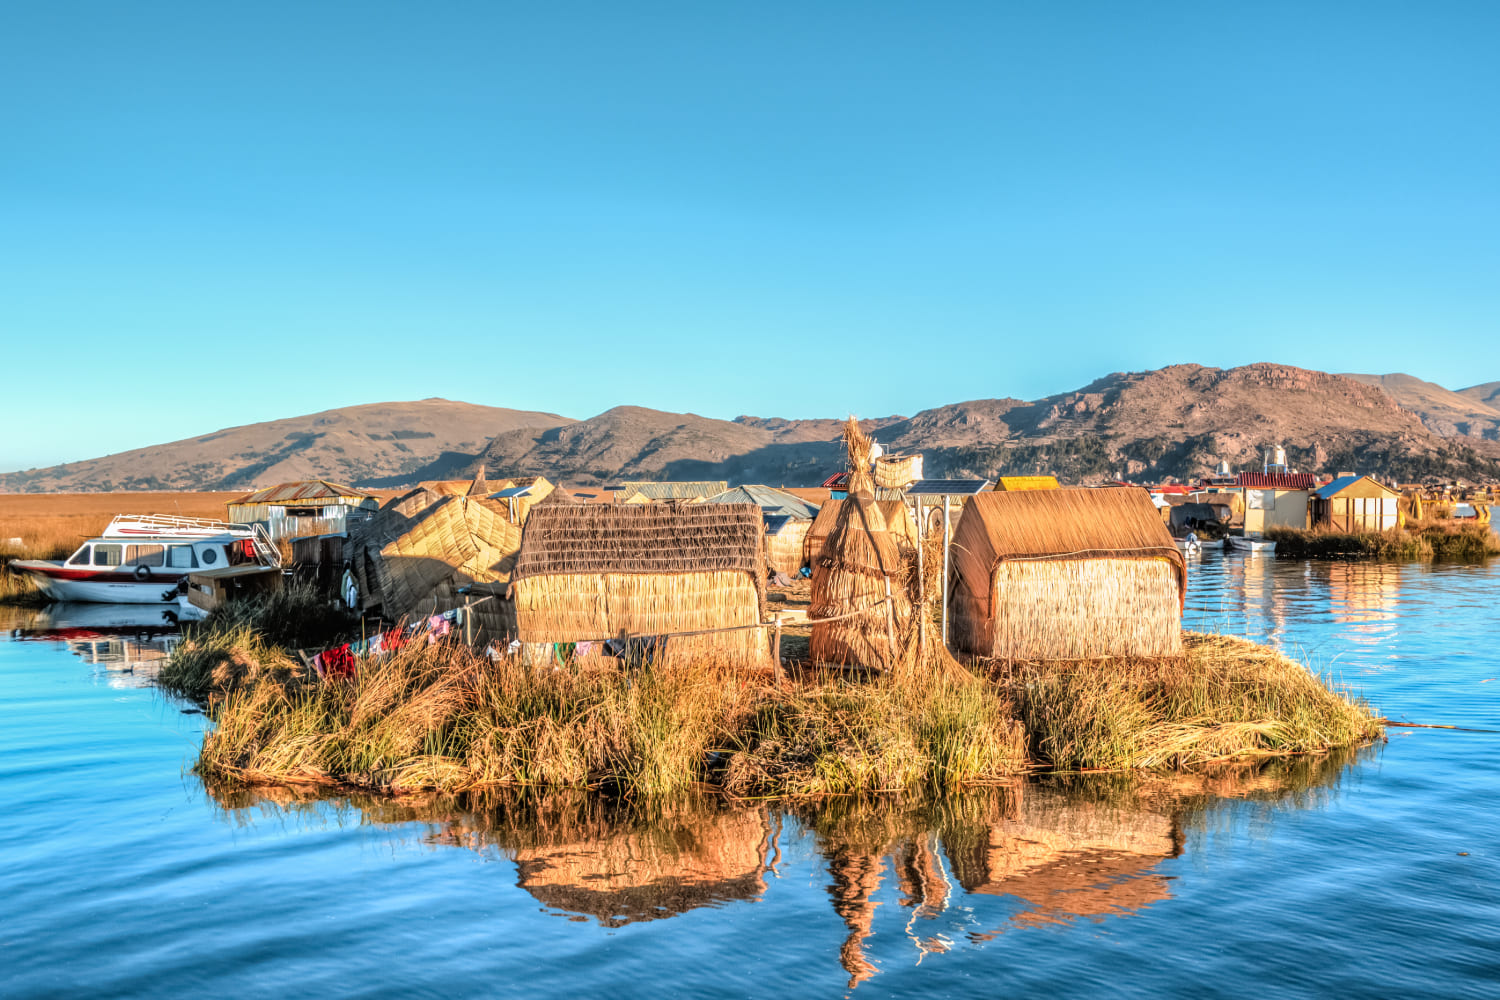 The floating islands and the houses of the Uros